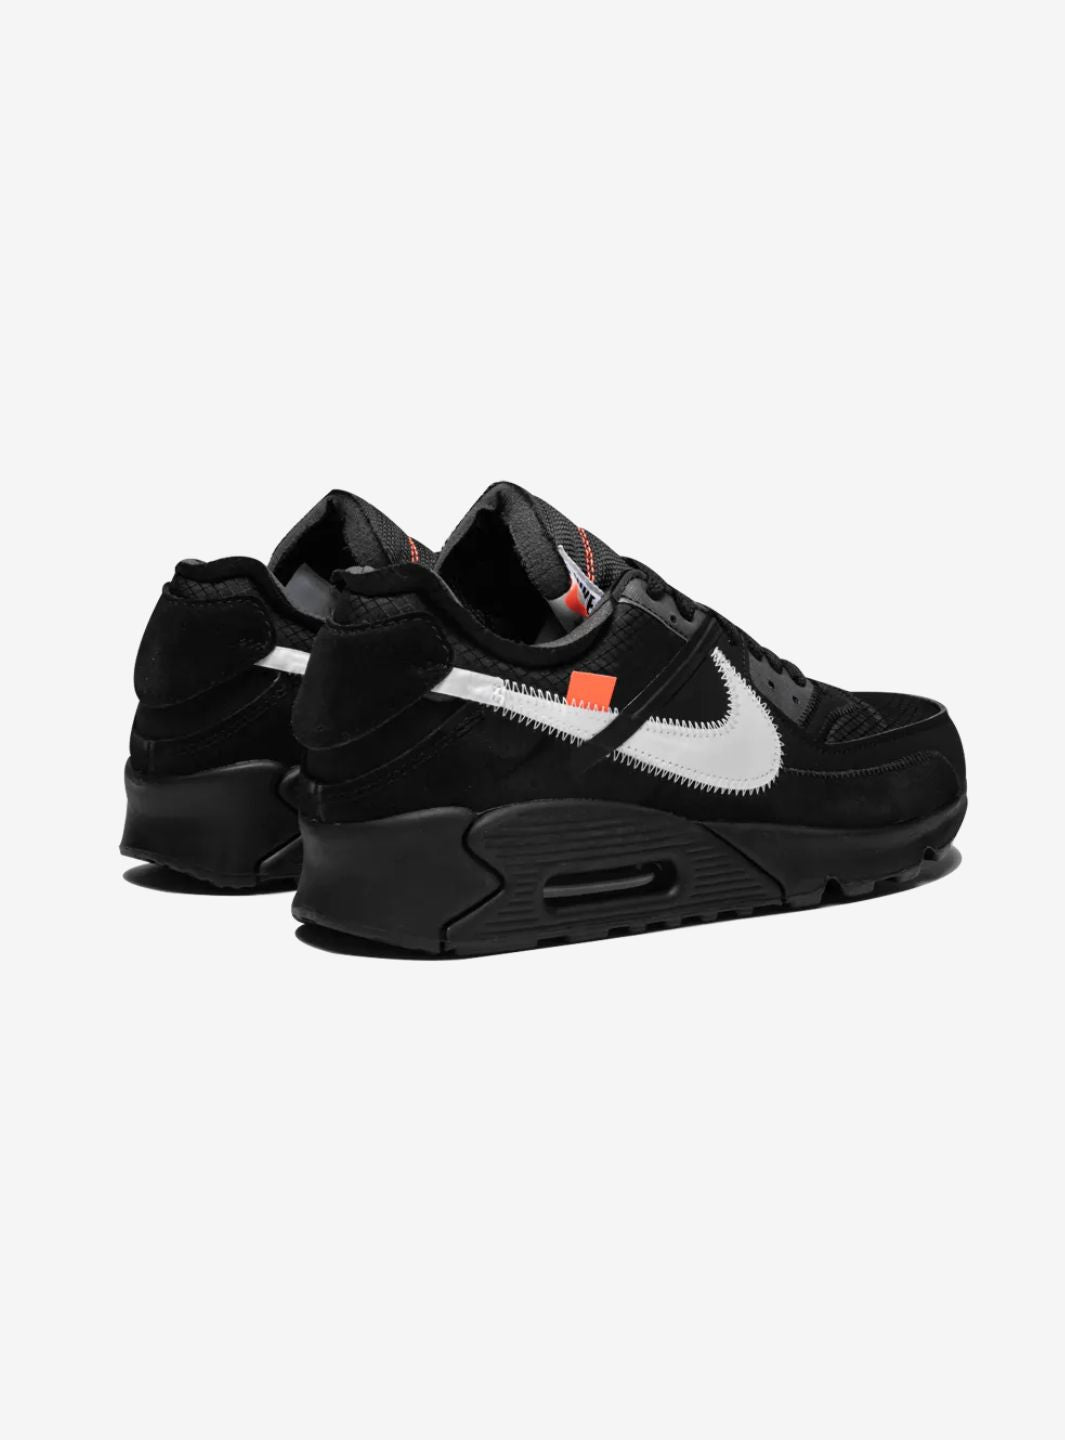 Nike Air Max 90 Off-White Black - AA7293-001 | ResellZone